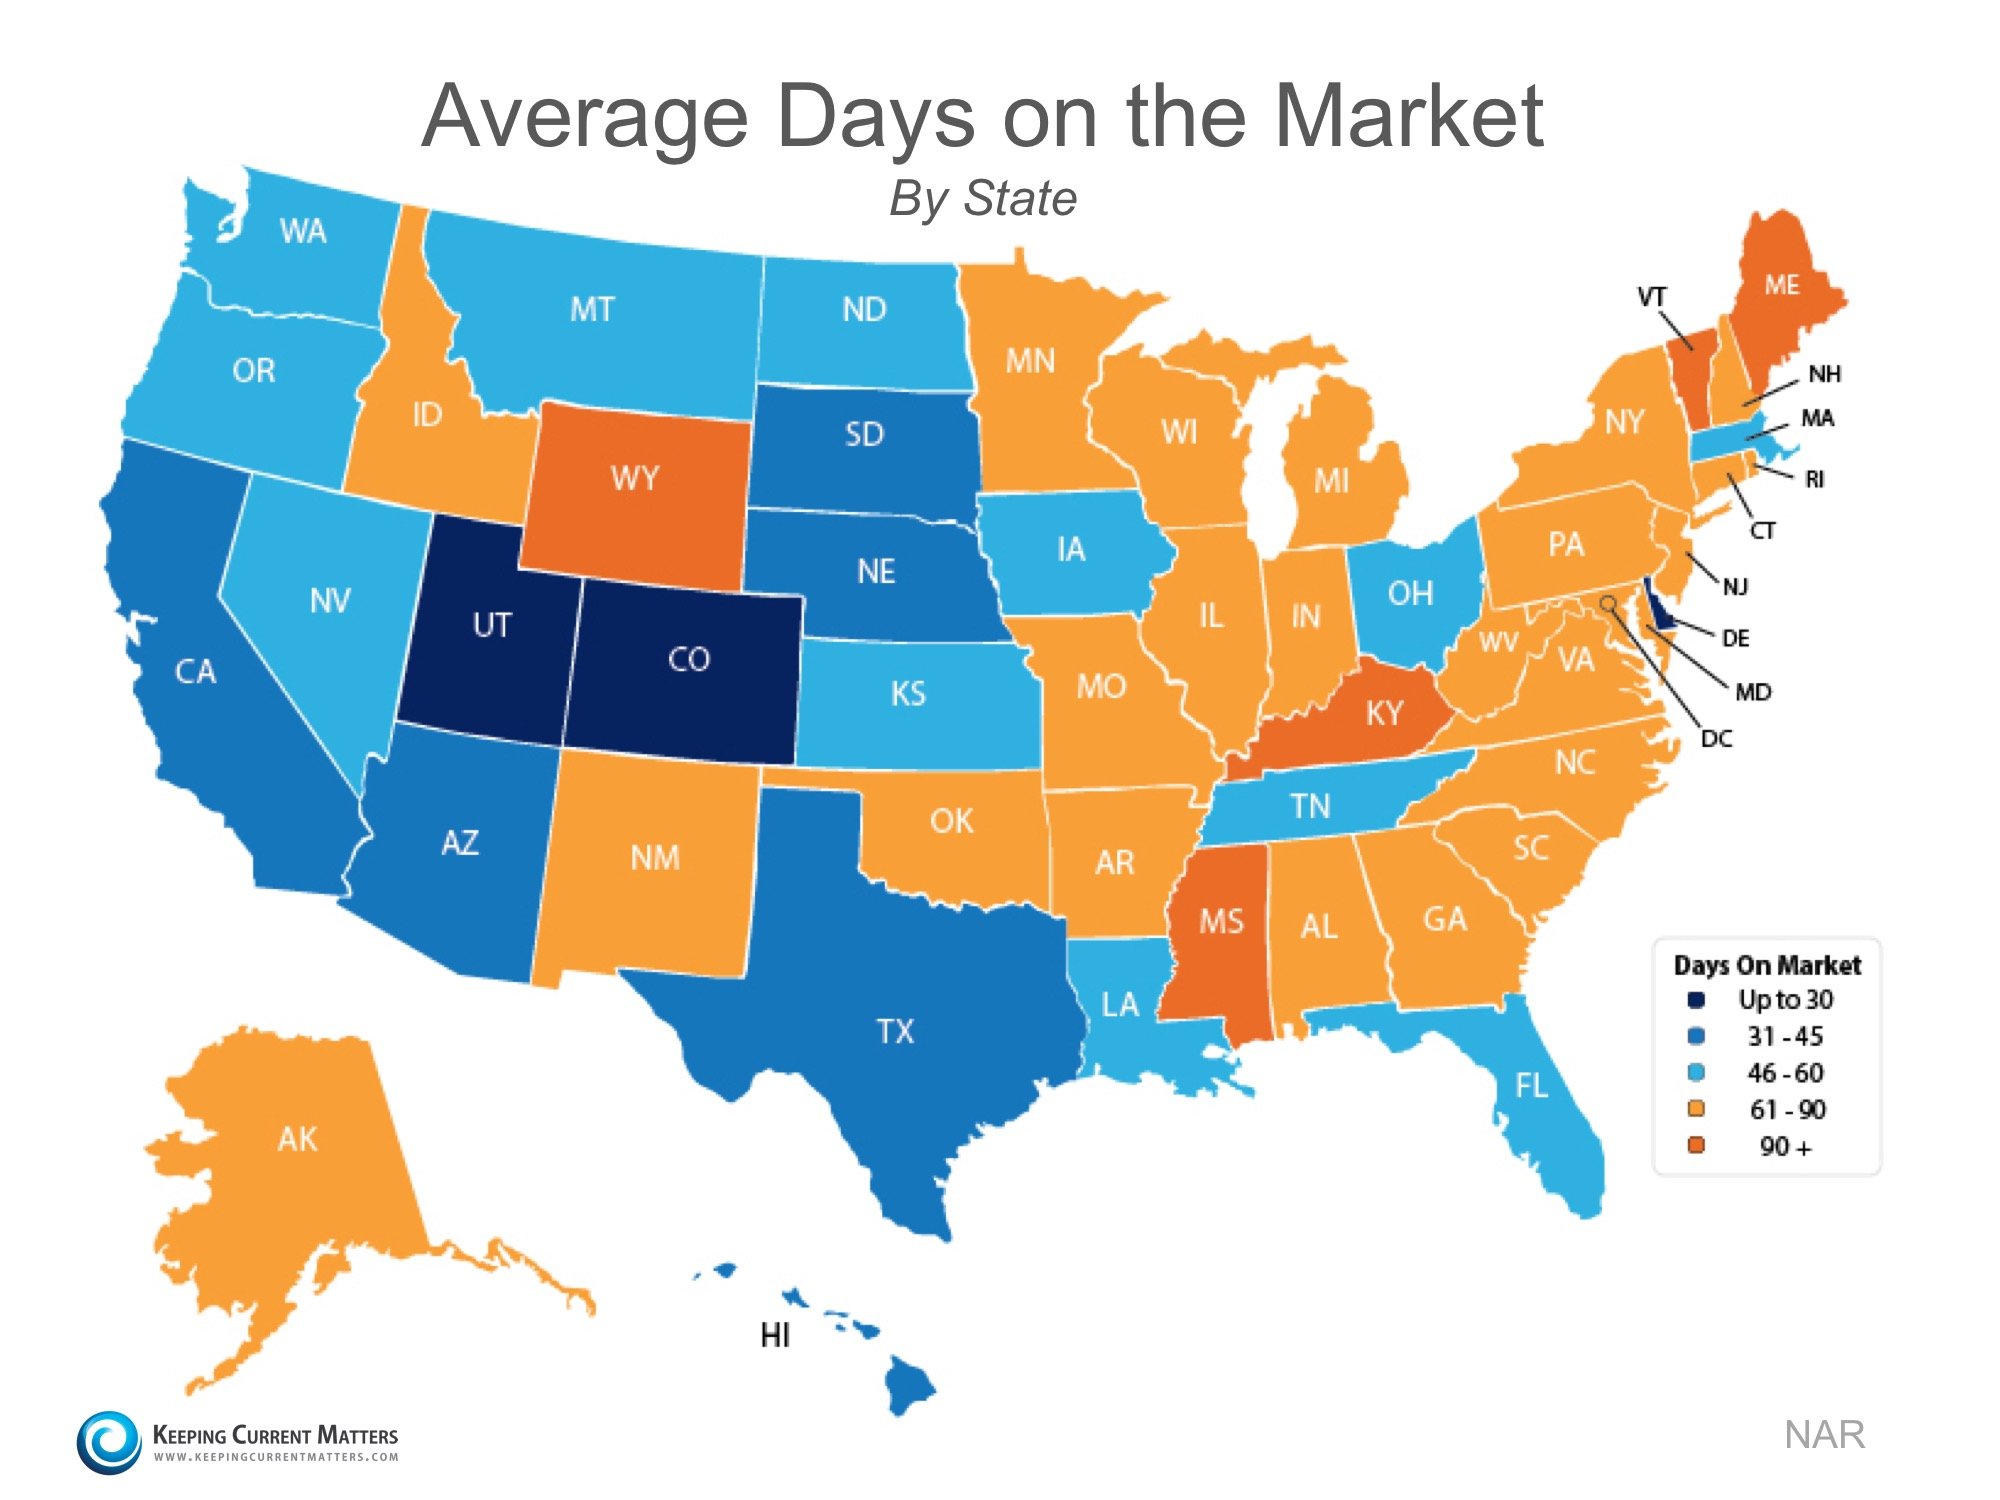 Homes Selling Quickly Across The Country | Keeping Current Matters